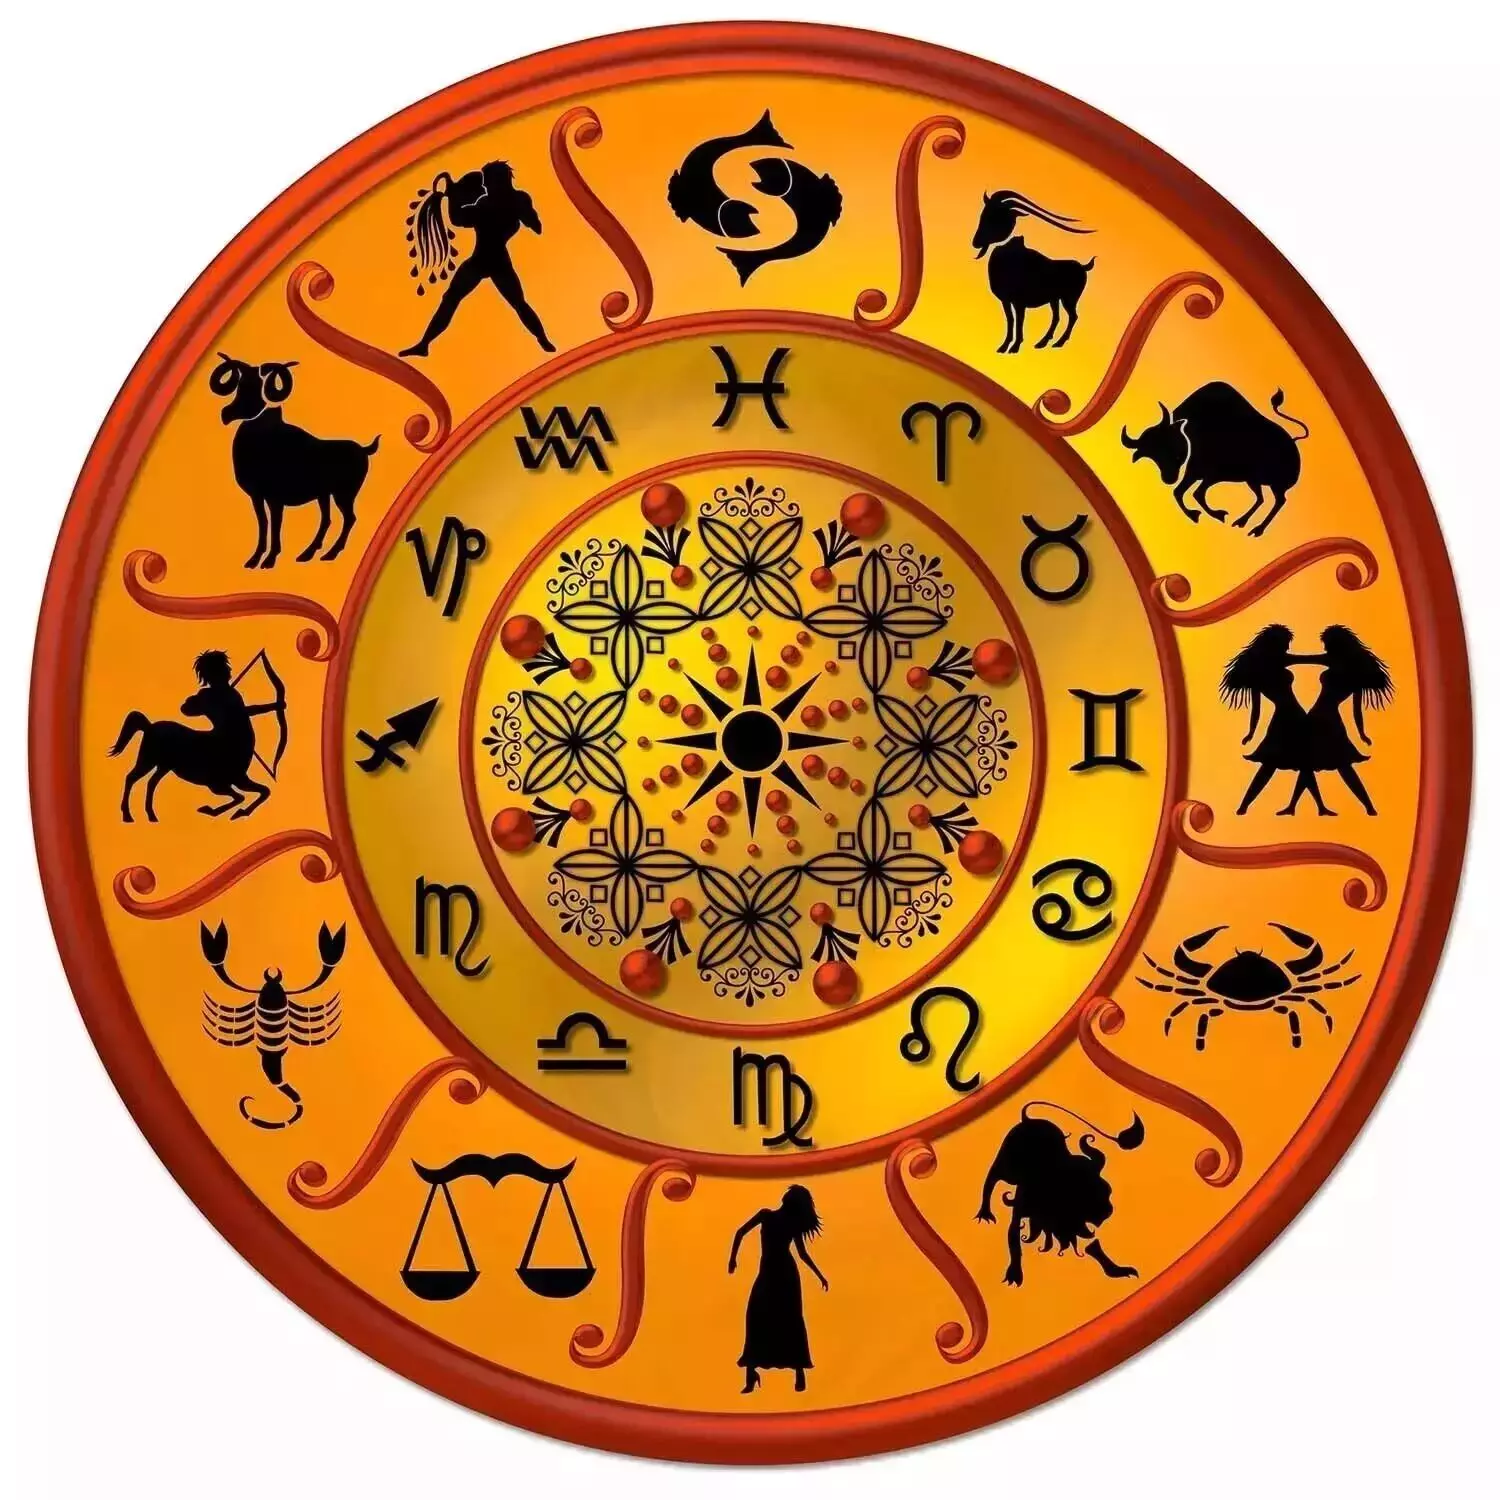 05 April  – Know your todays horoscope